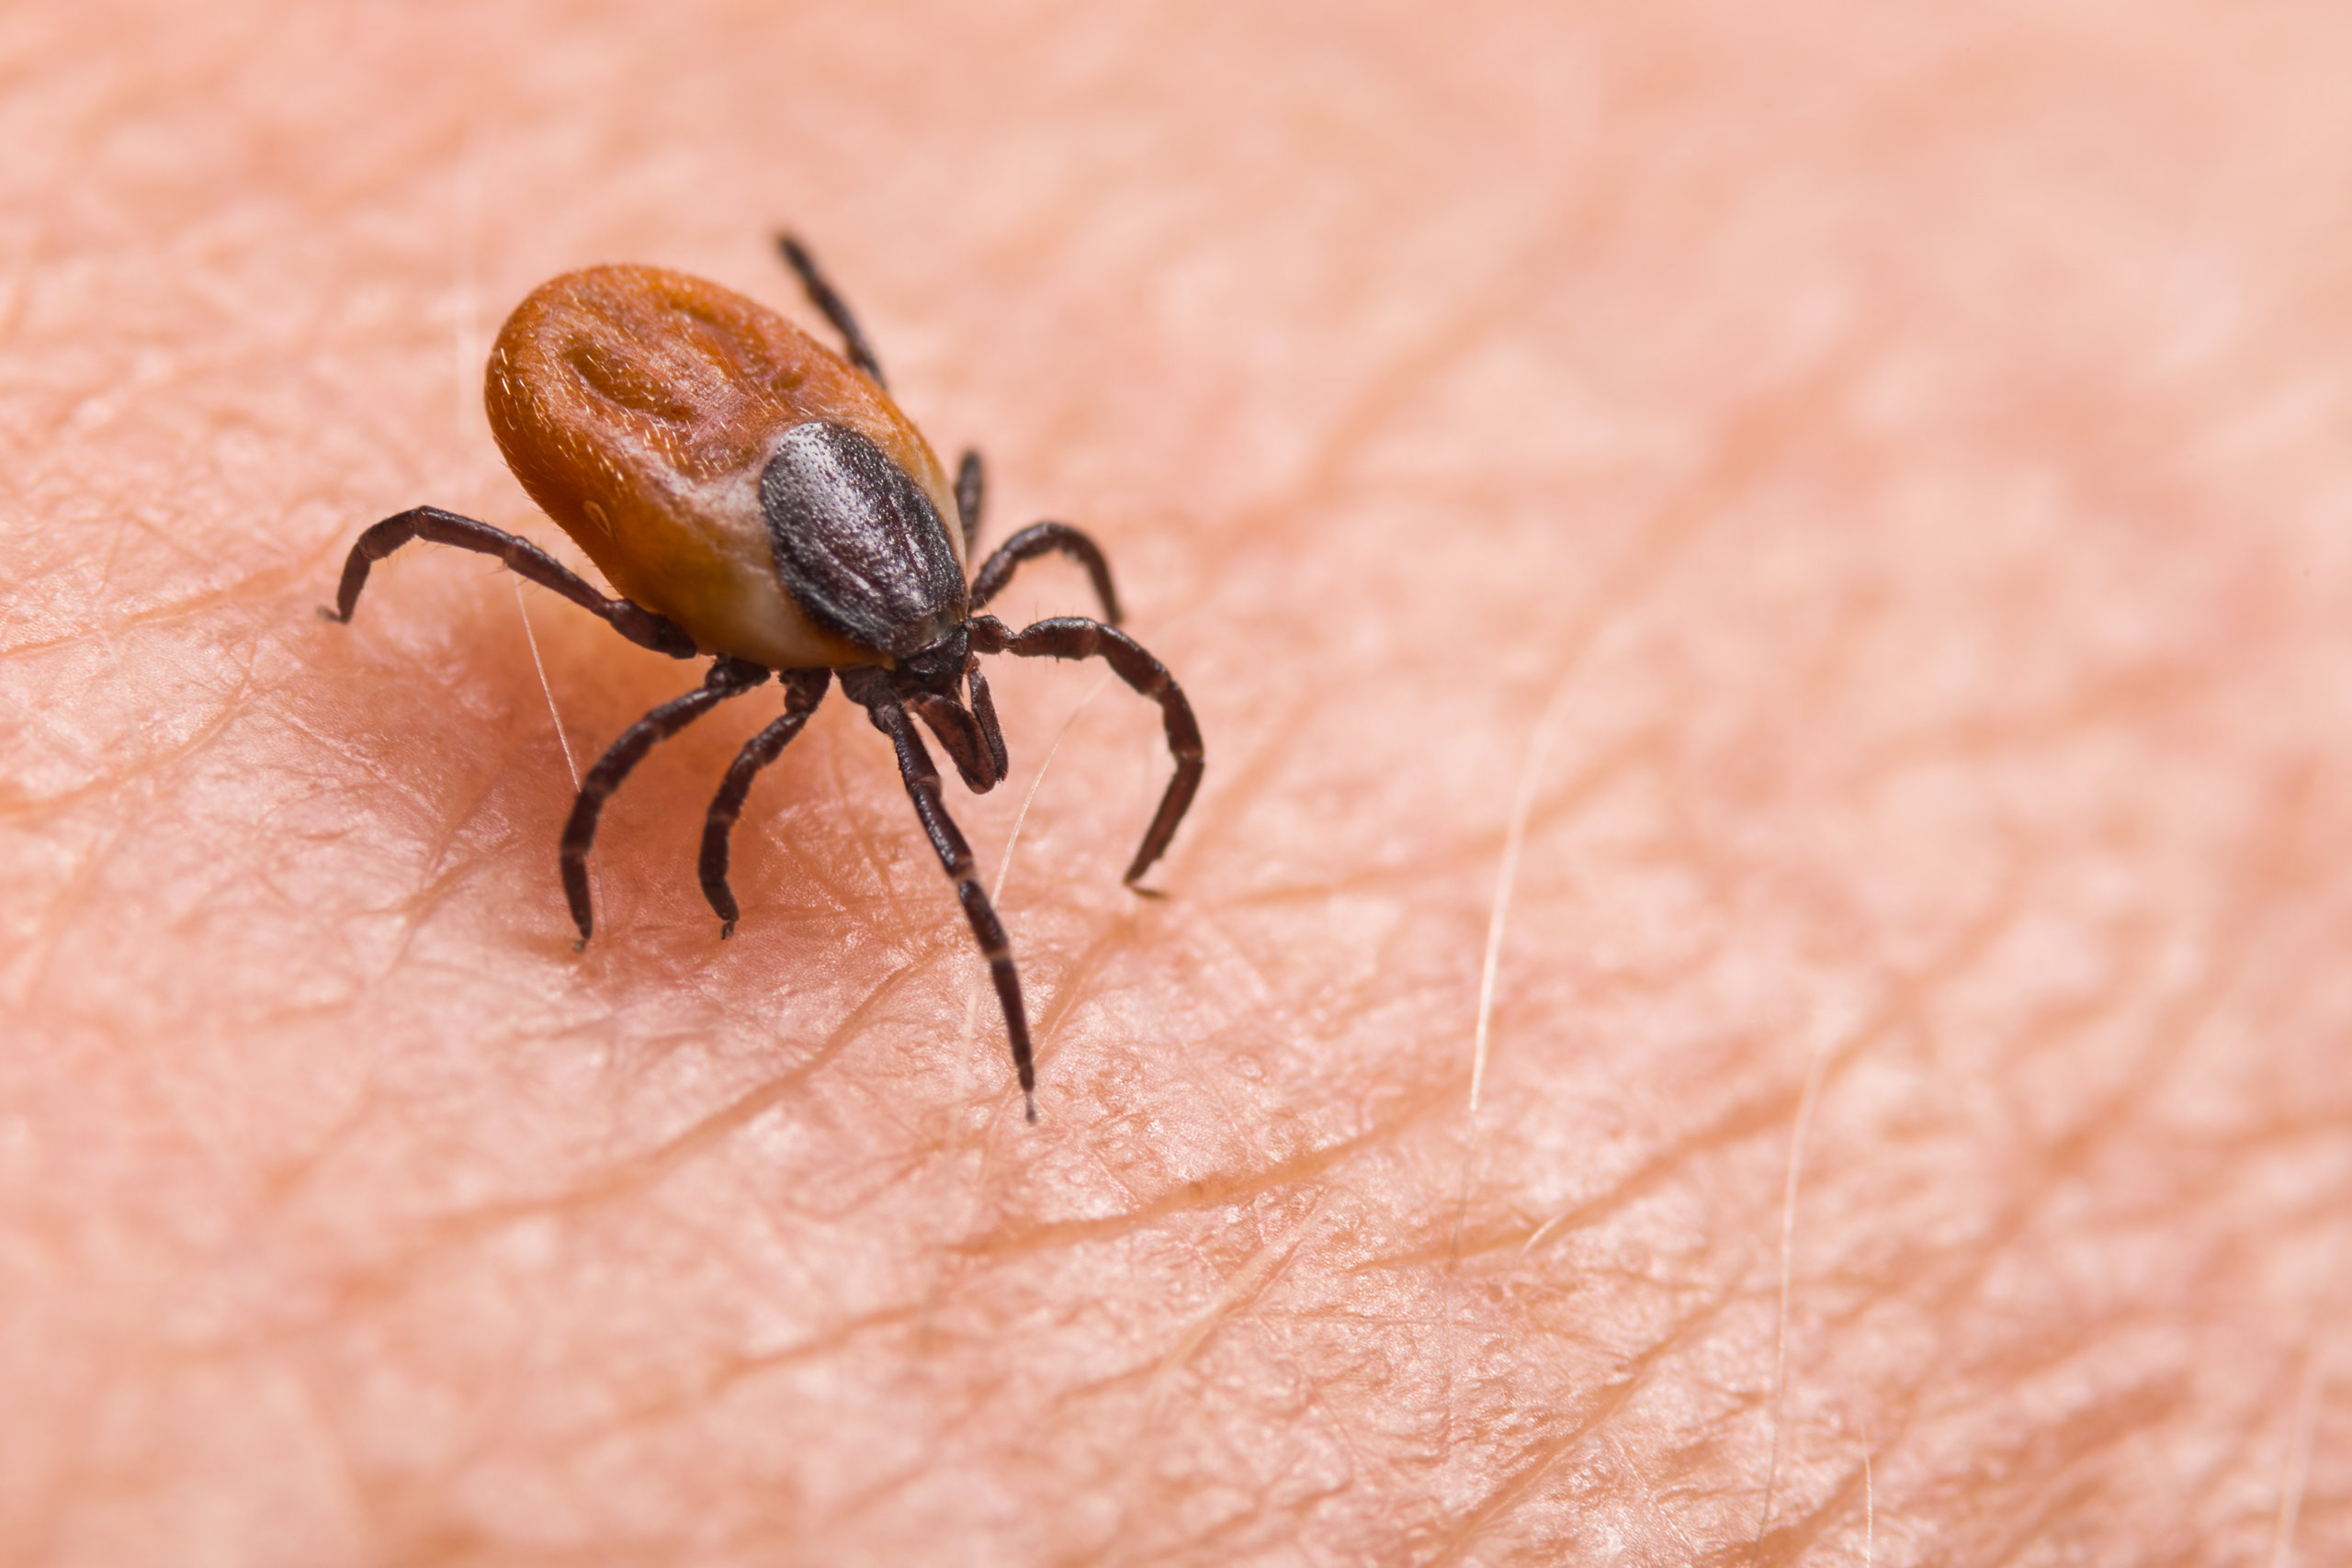 Deer ticks carry Lyme disease, and they are quite small